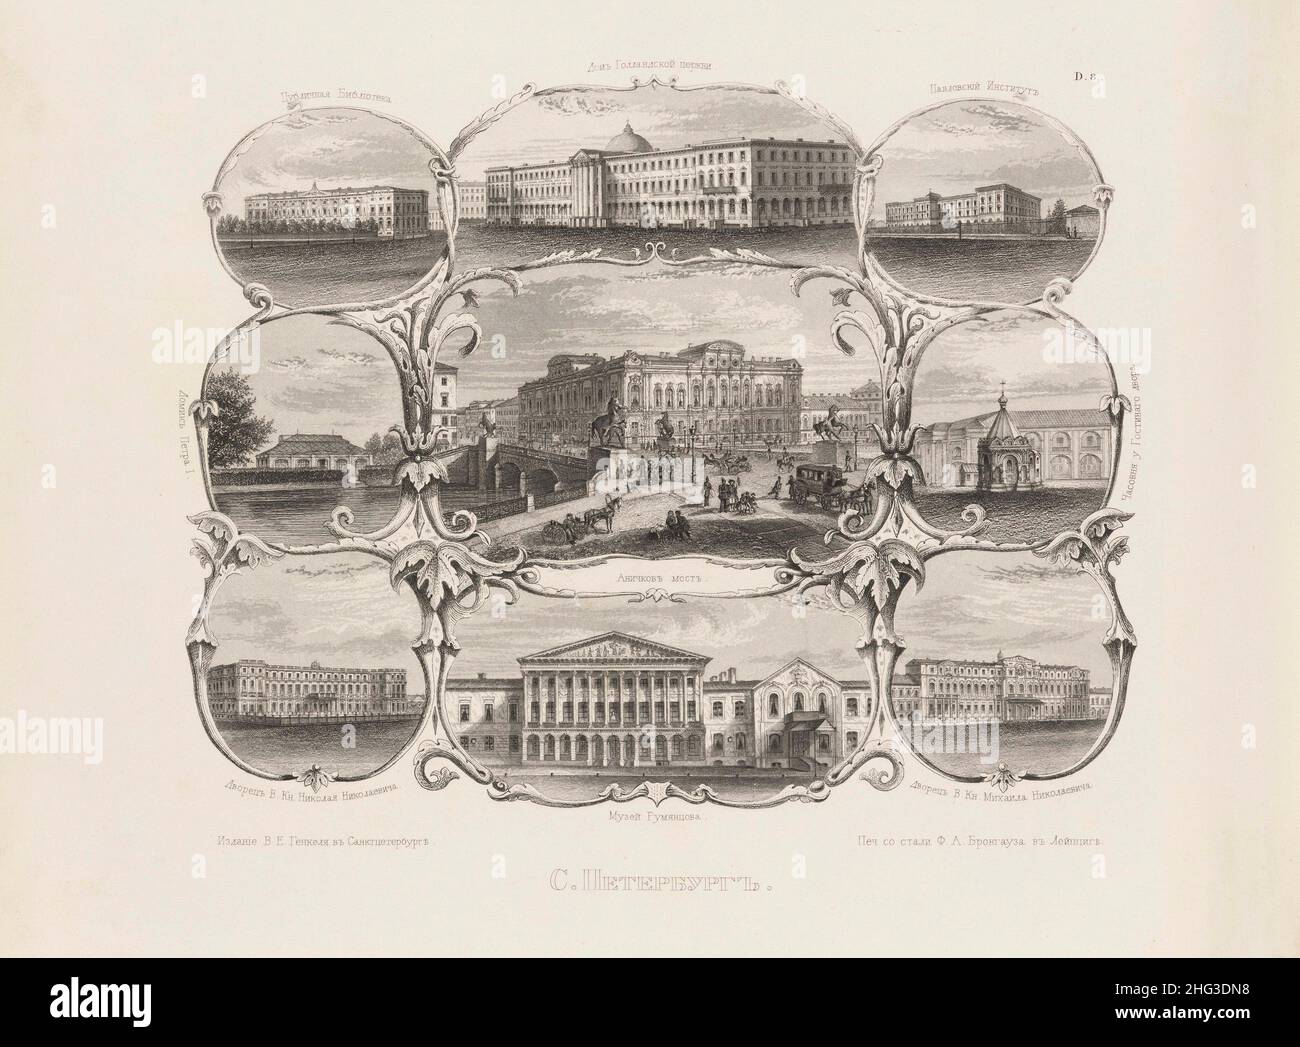 Engravings of St. Peterburg of the 19th century. From top left clockwise: Imperial Public Library; Building of Dutch Reformed Church, Pavlov Medical I Stock Photo